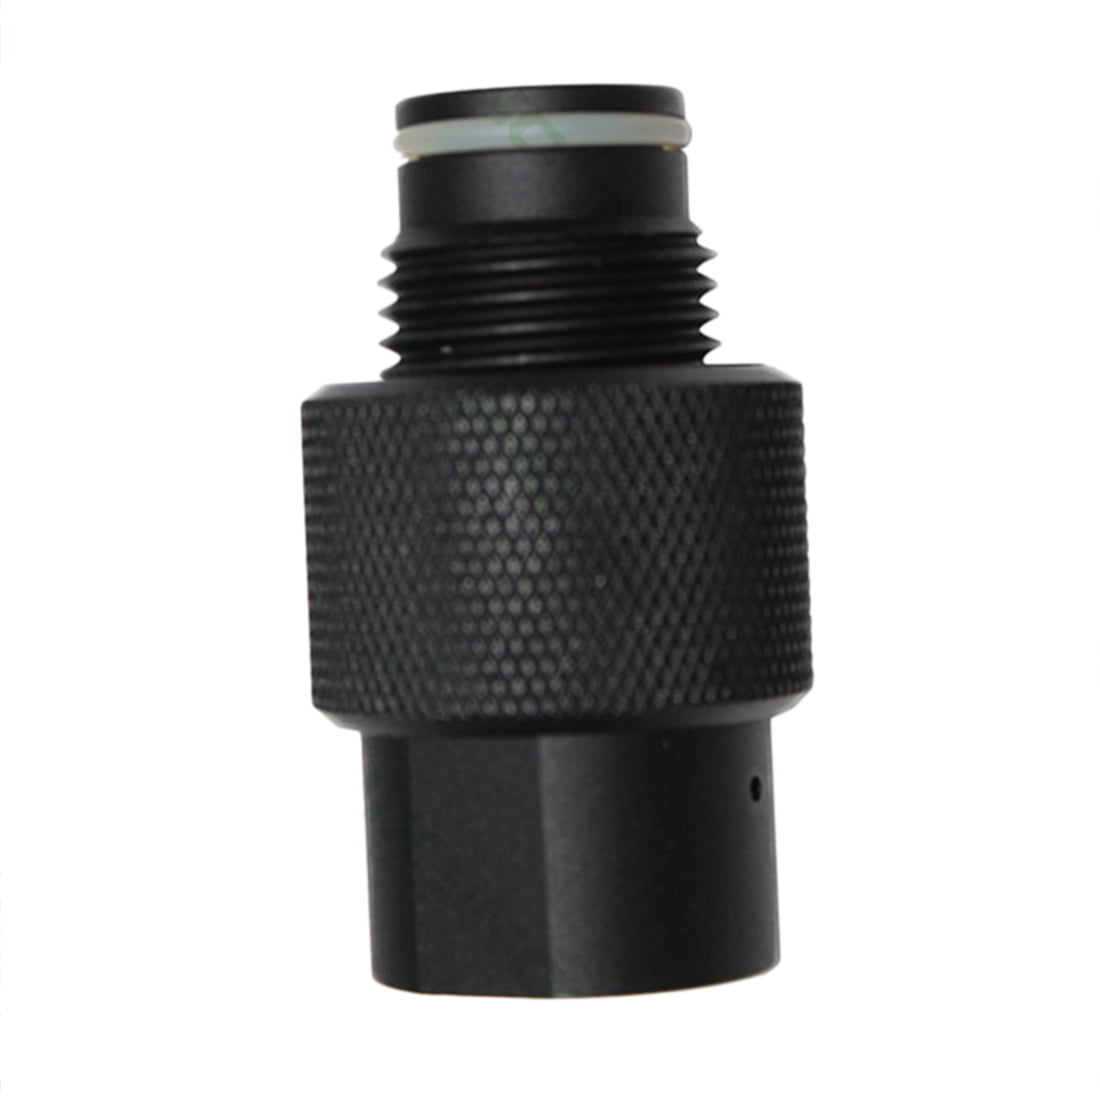 Details about   Black Hpat Paintball Air Adapter Inline Air Adapter With On And Off Valve Metal 